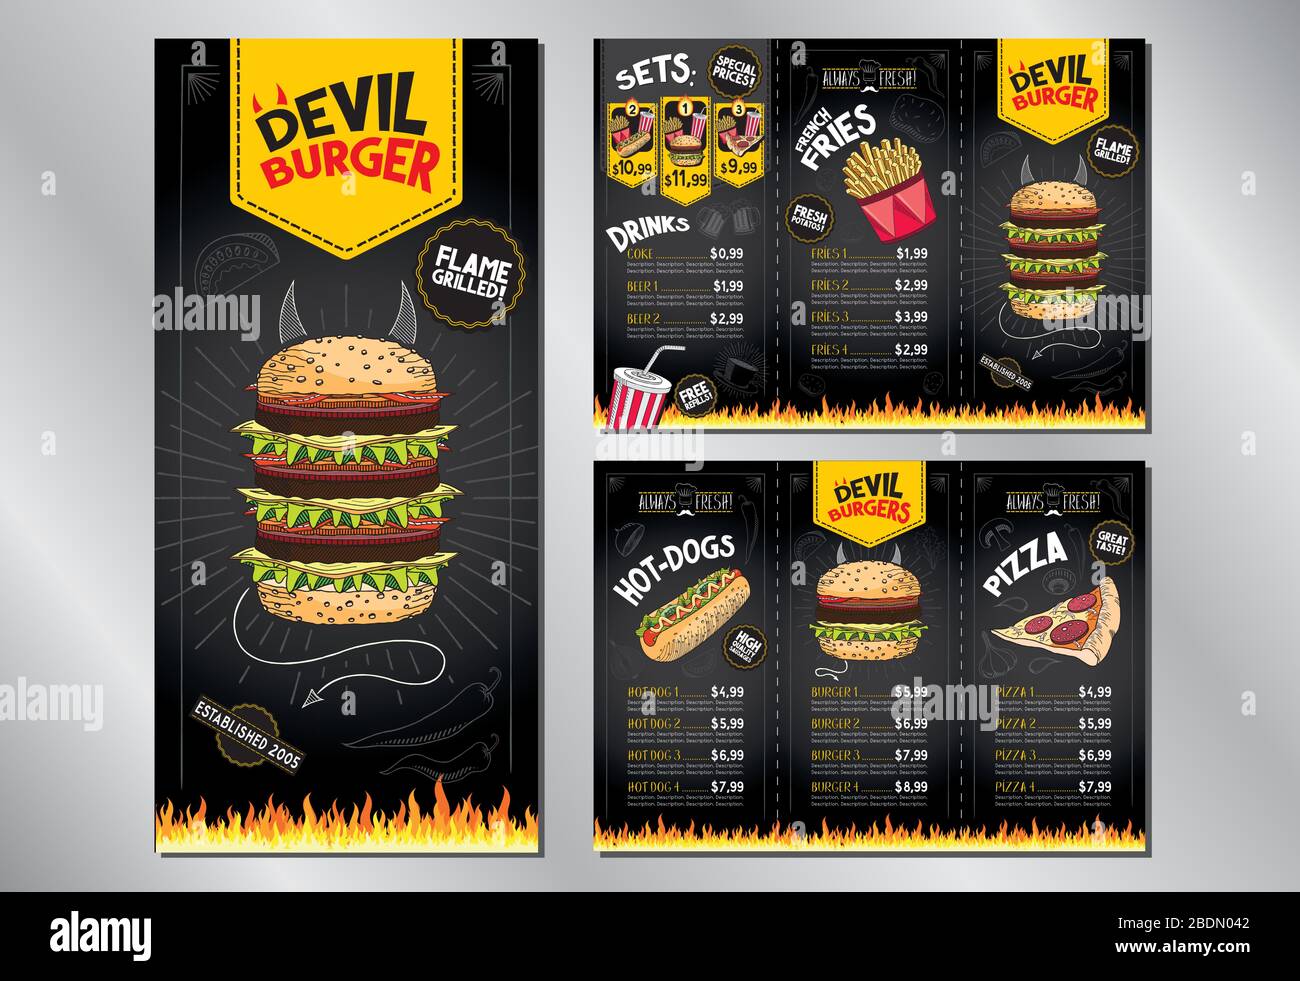 Devil burger - restaurant menu card/ template - (burgers, french fries, hot-dogs, pizza, drinks, sets) - 3 x DL (99x210 mm) Stock Vector